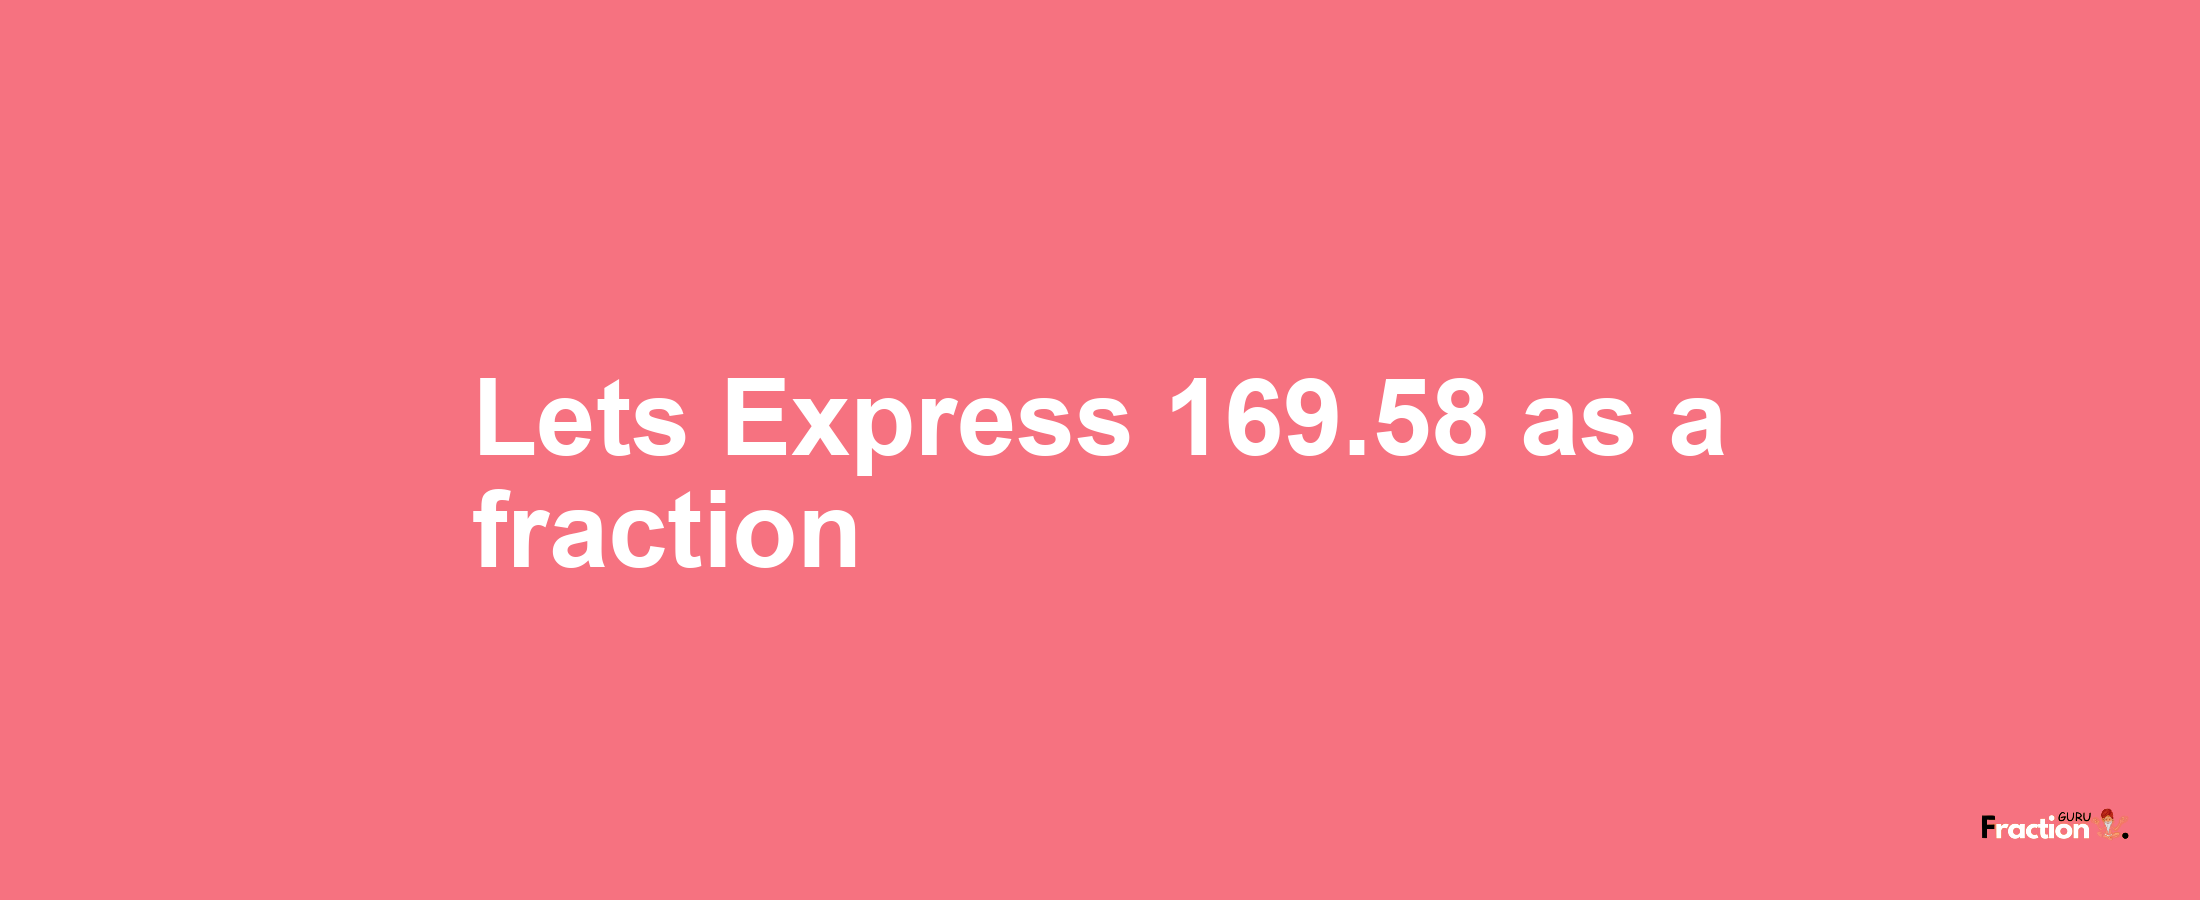 Lets Express 169.58 as afraction